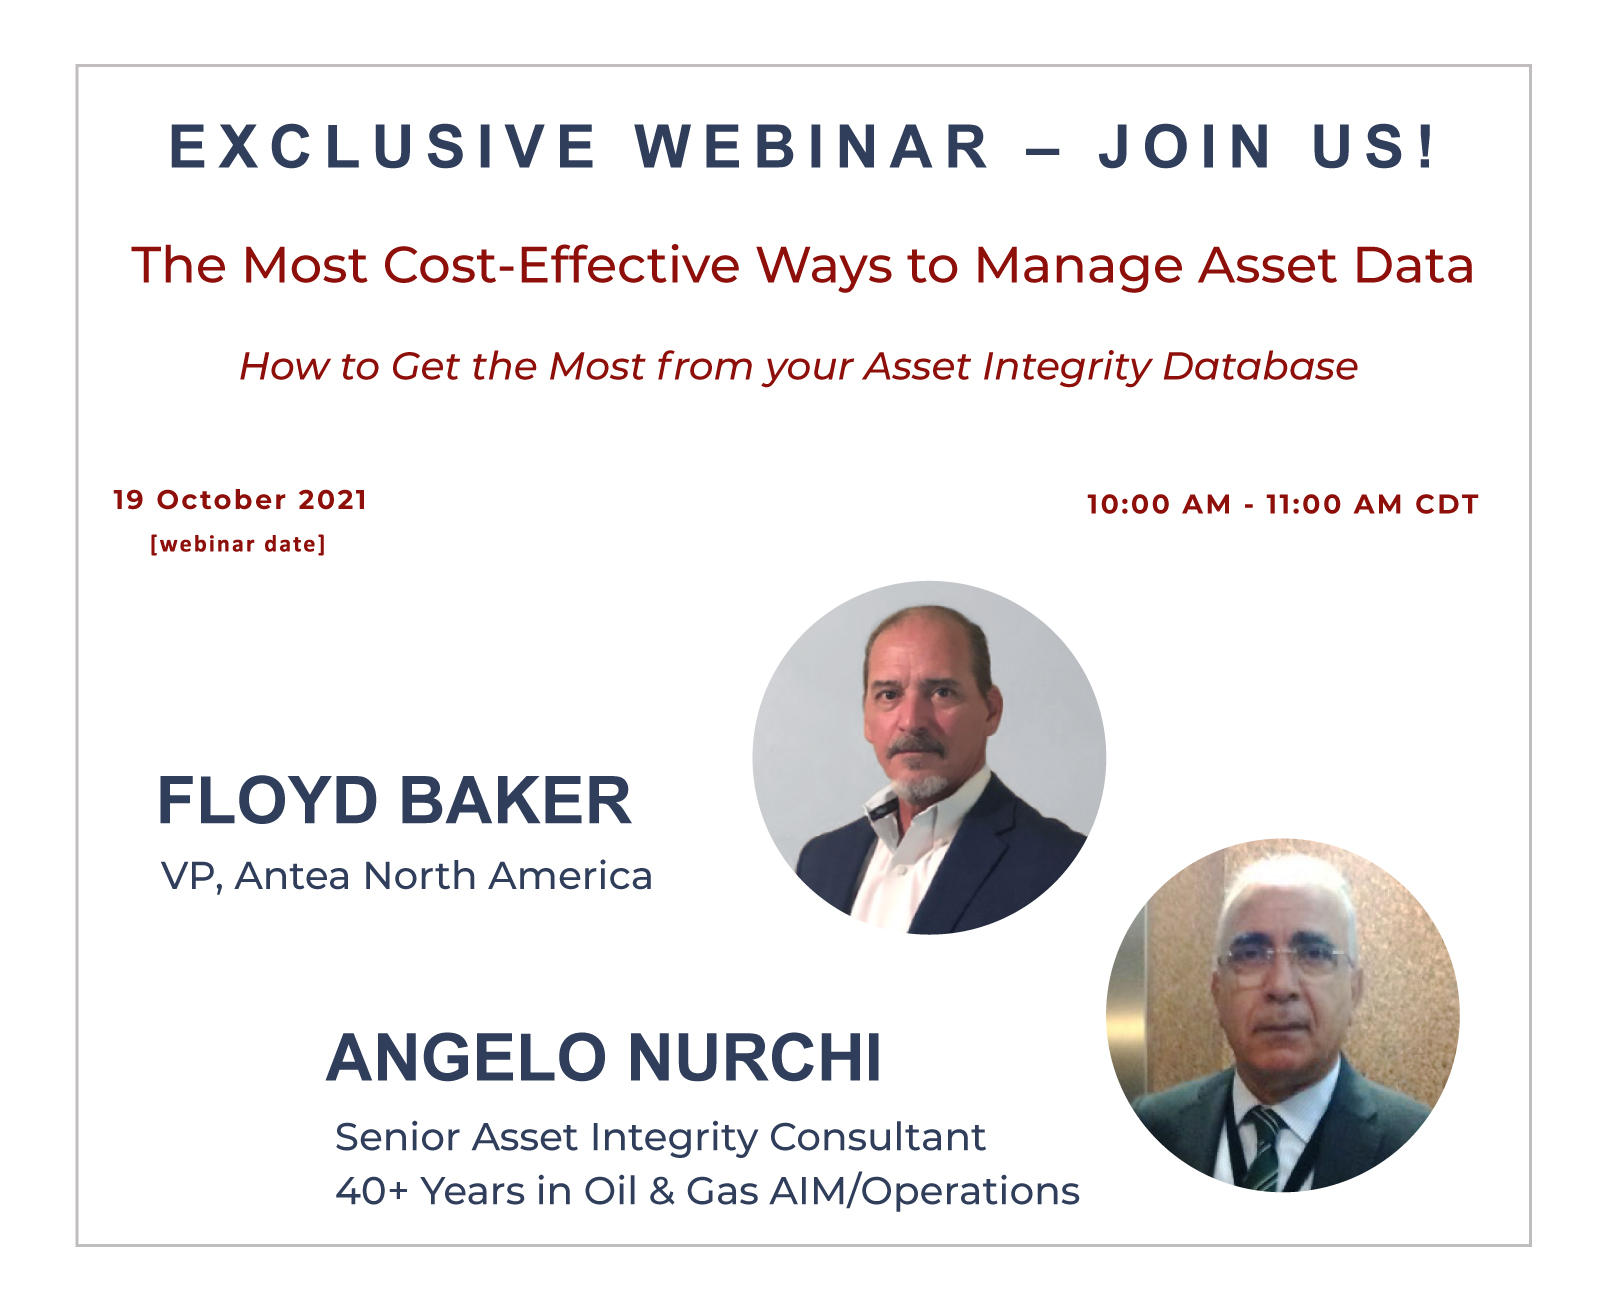 Graphic banner depicting biographical images and text details of the Most Cost-Effective Ways to Manage Asset Data asset integrity management webinar.